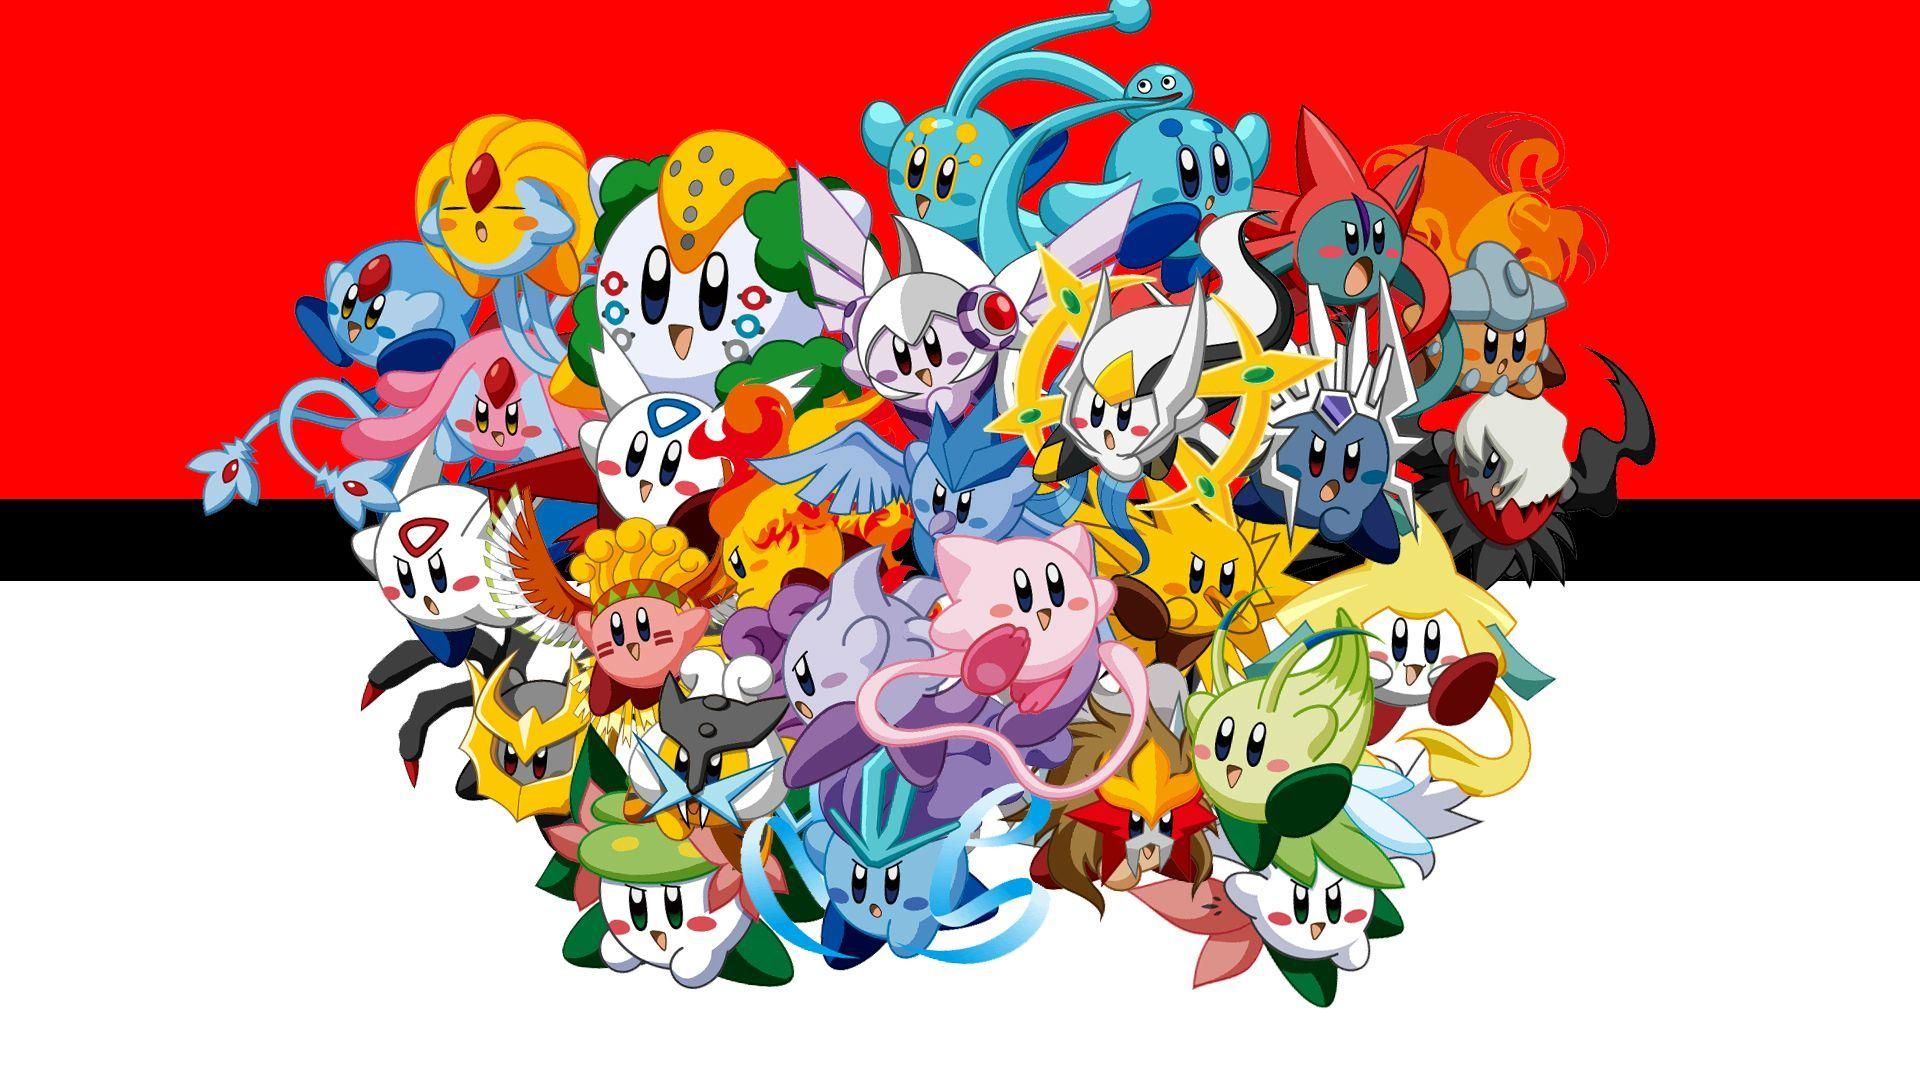 I made a wallpaper with Kirby as (most of) the Legendary Pokémon